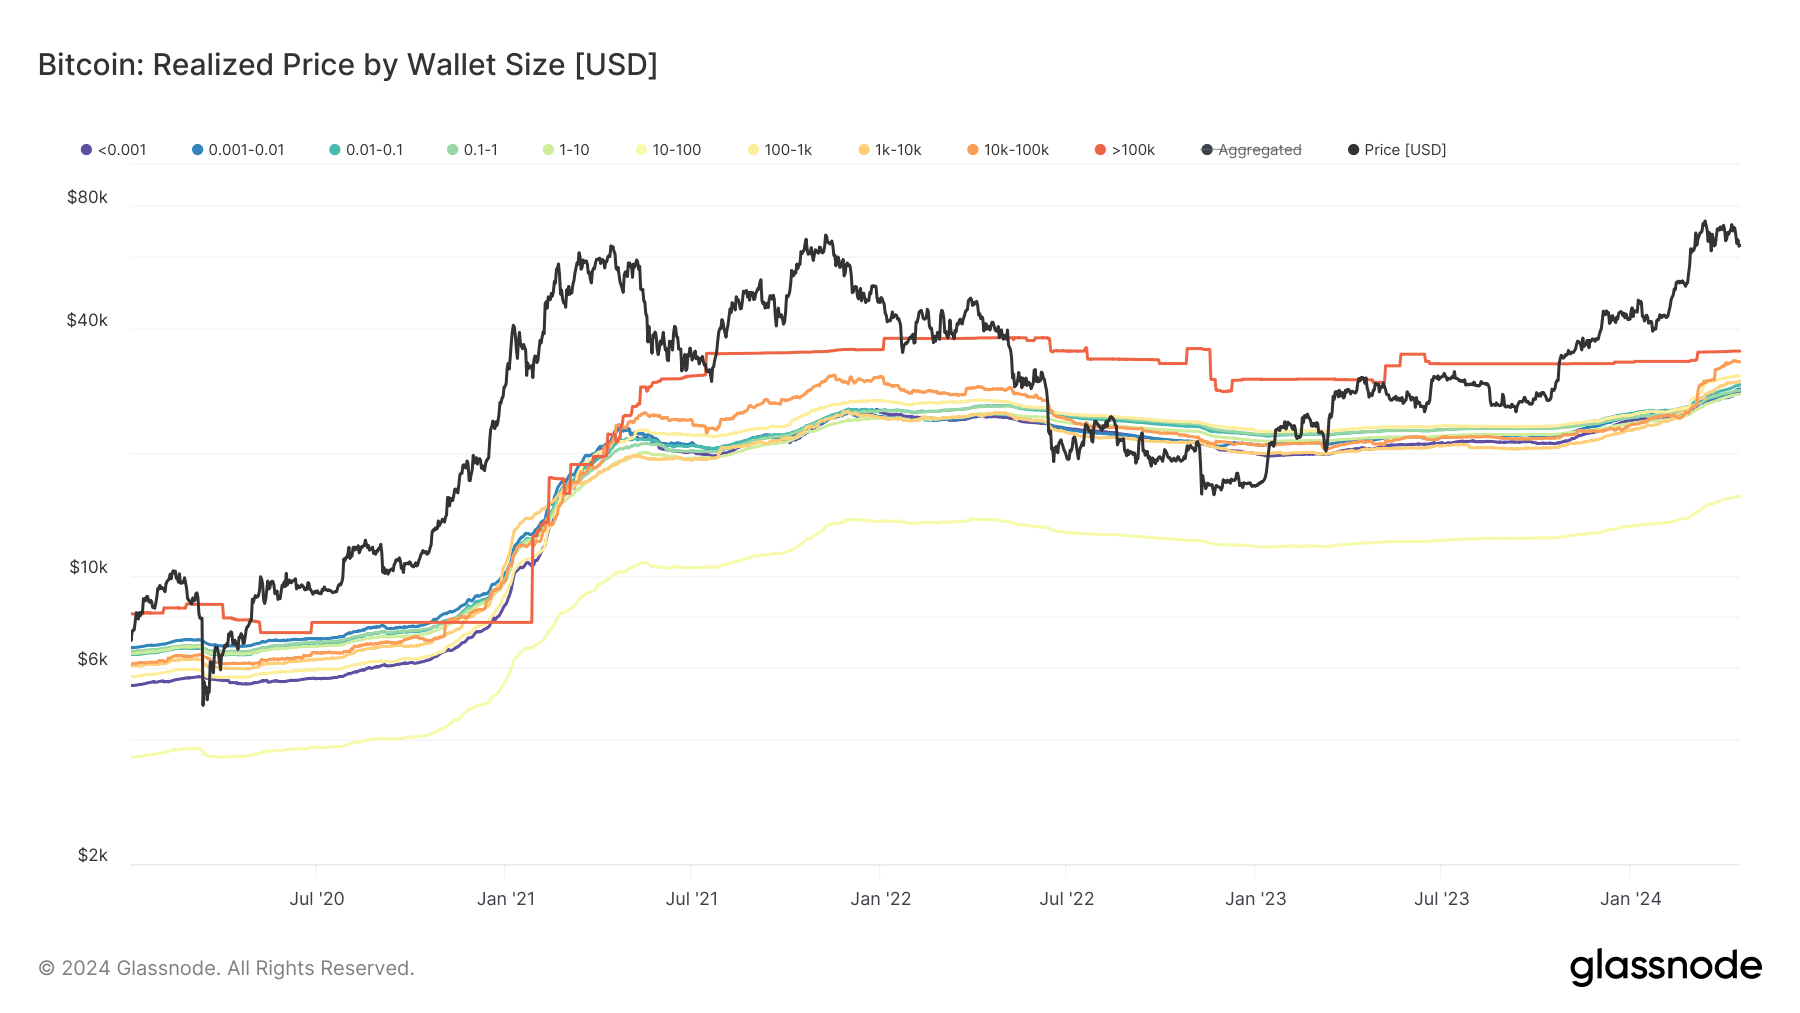 Bitcoin realized price by wallet size since 2020 (Glassnode)